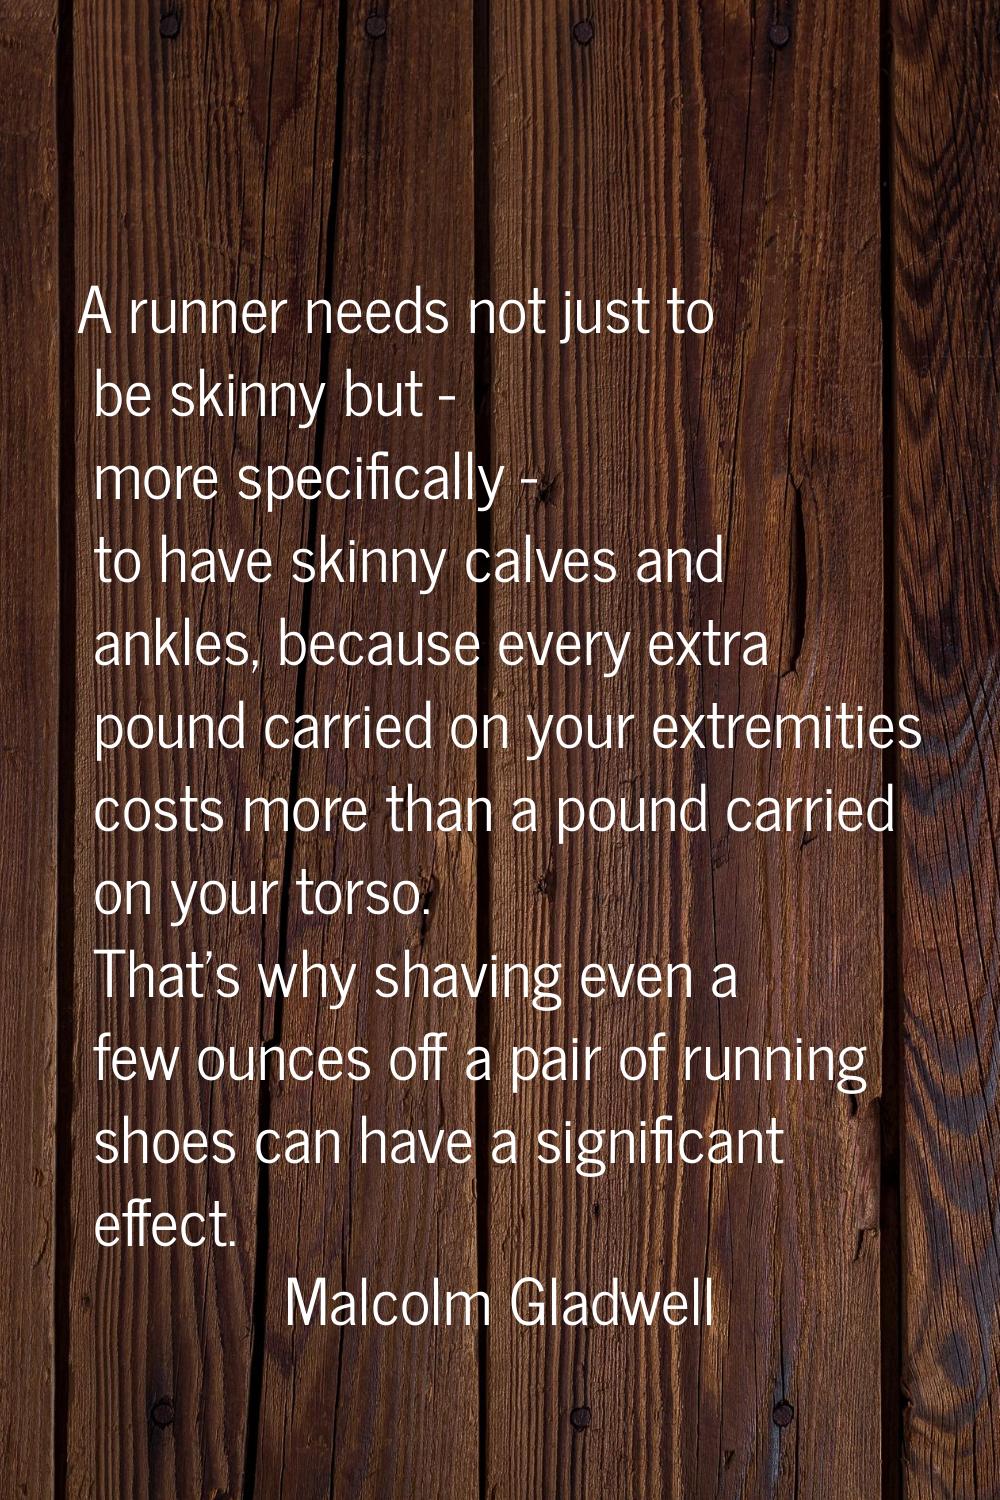 A runner needs not just to be skinny but - more specifically - to have skinny calves and ankles, be